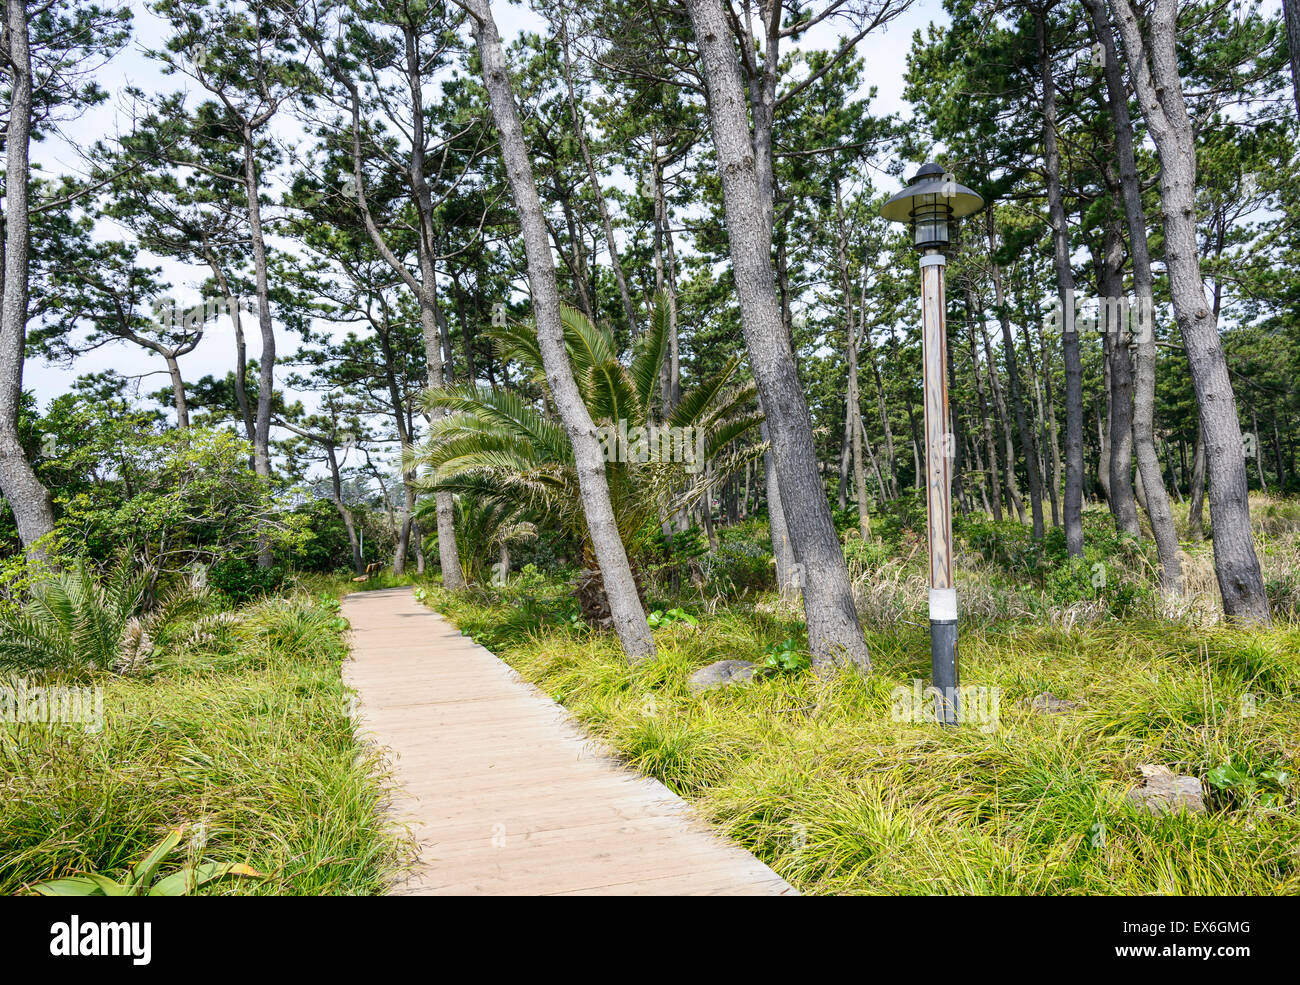 VIew of Olle trail course No. 7 in Jeju island, Korea. Olle is famous trekking courses created along coast of Jeju Island. Stock Photo